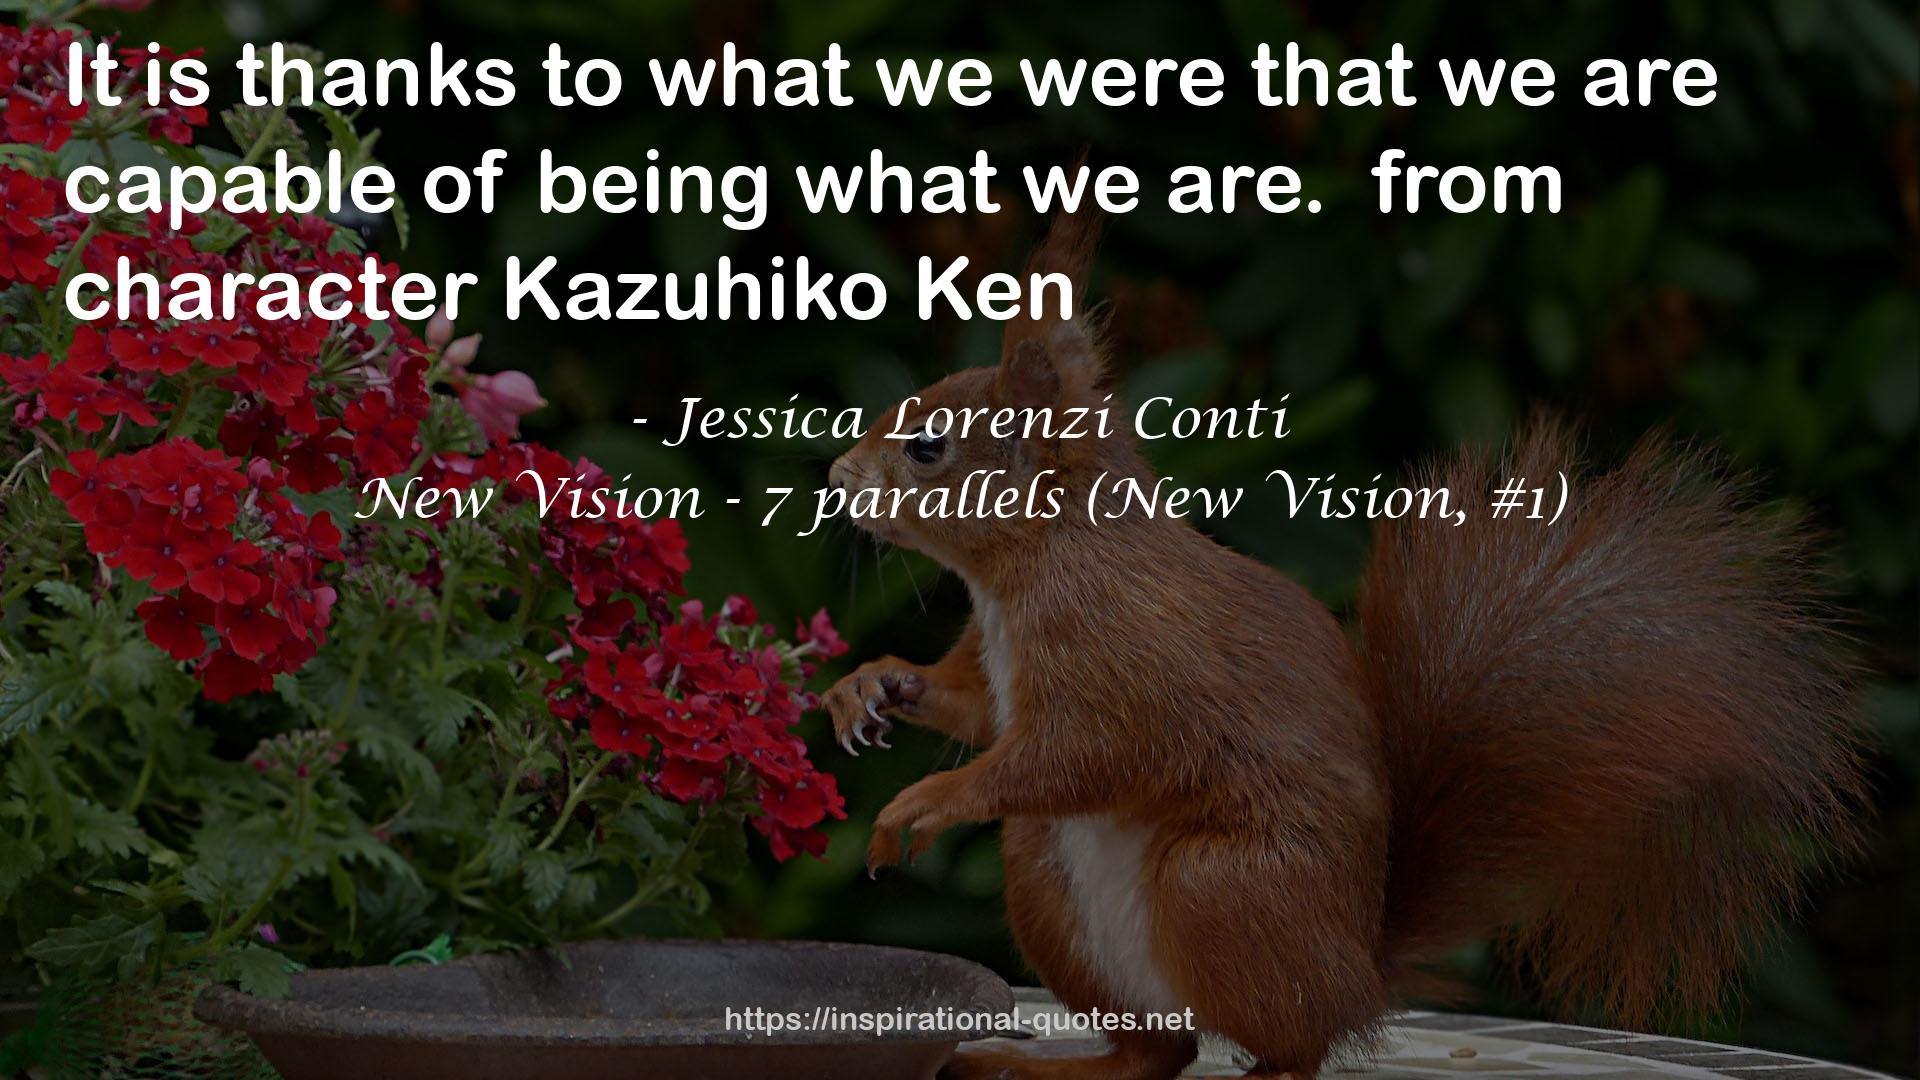 New Vision - 7 parallels (New Vision, #1) QUOTES